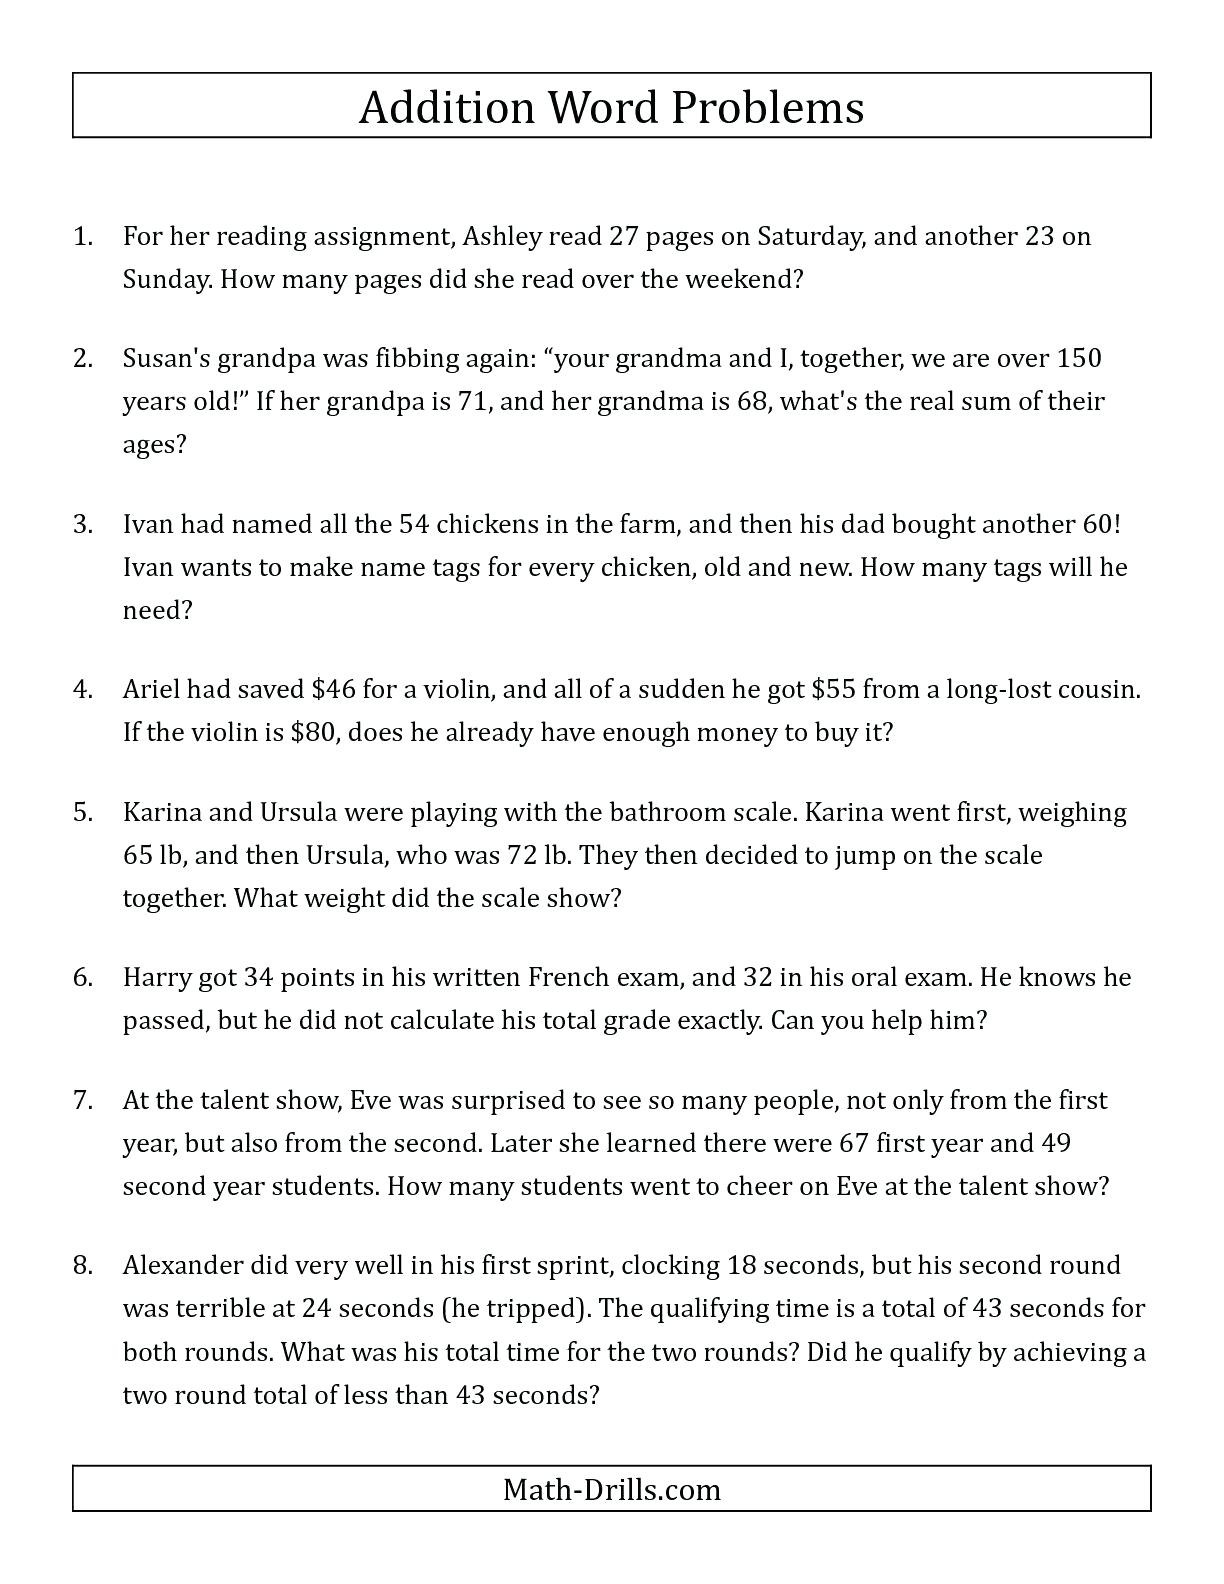 basic word problems worksheet the single step addition word problems using two digit numbers a word simple interest word problems worksheet pdf